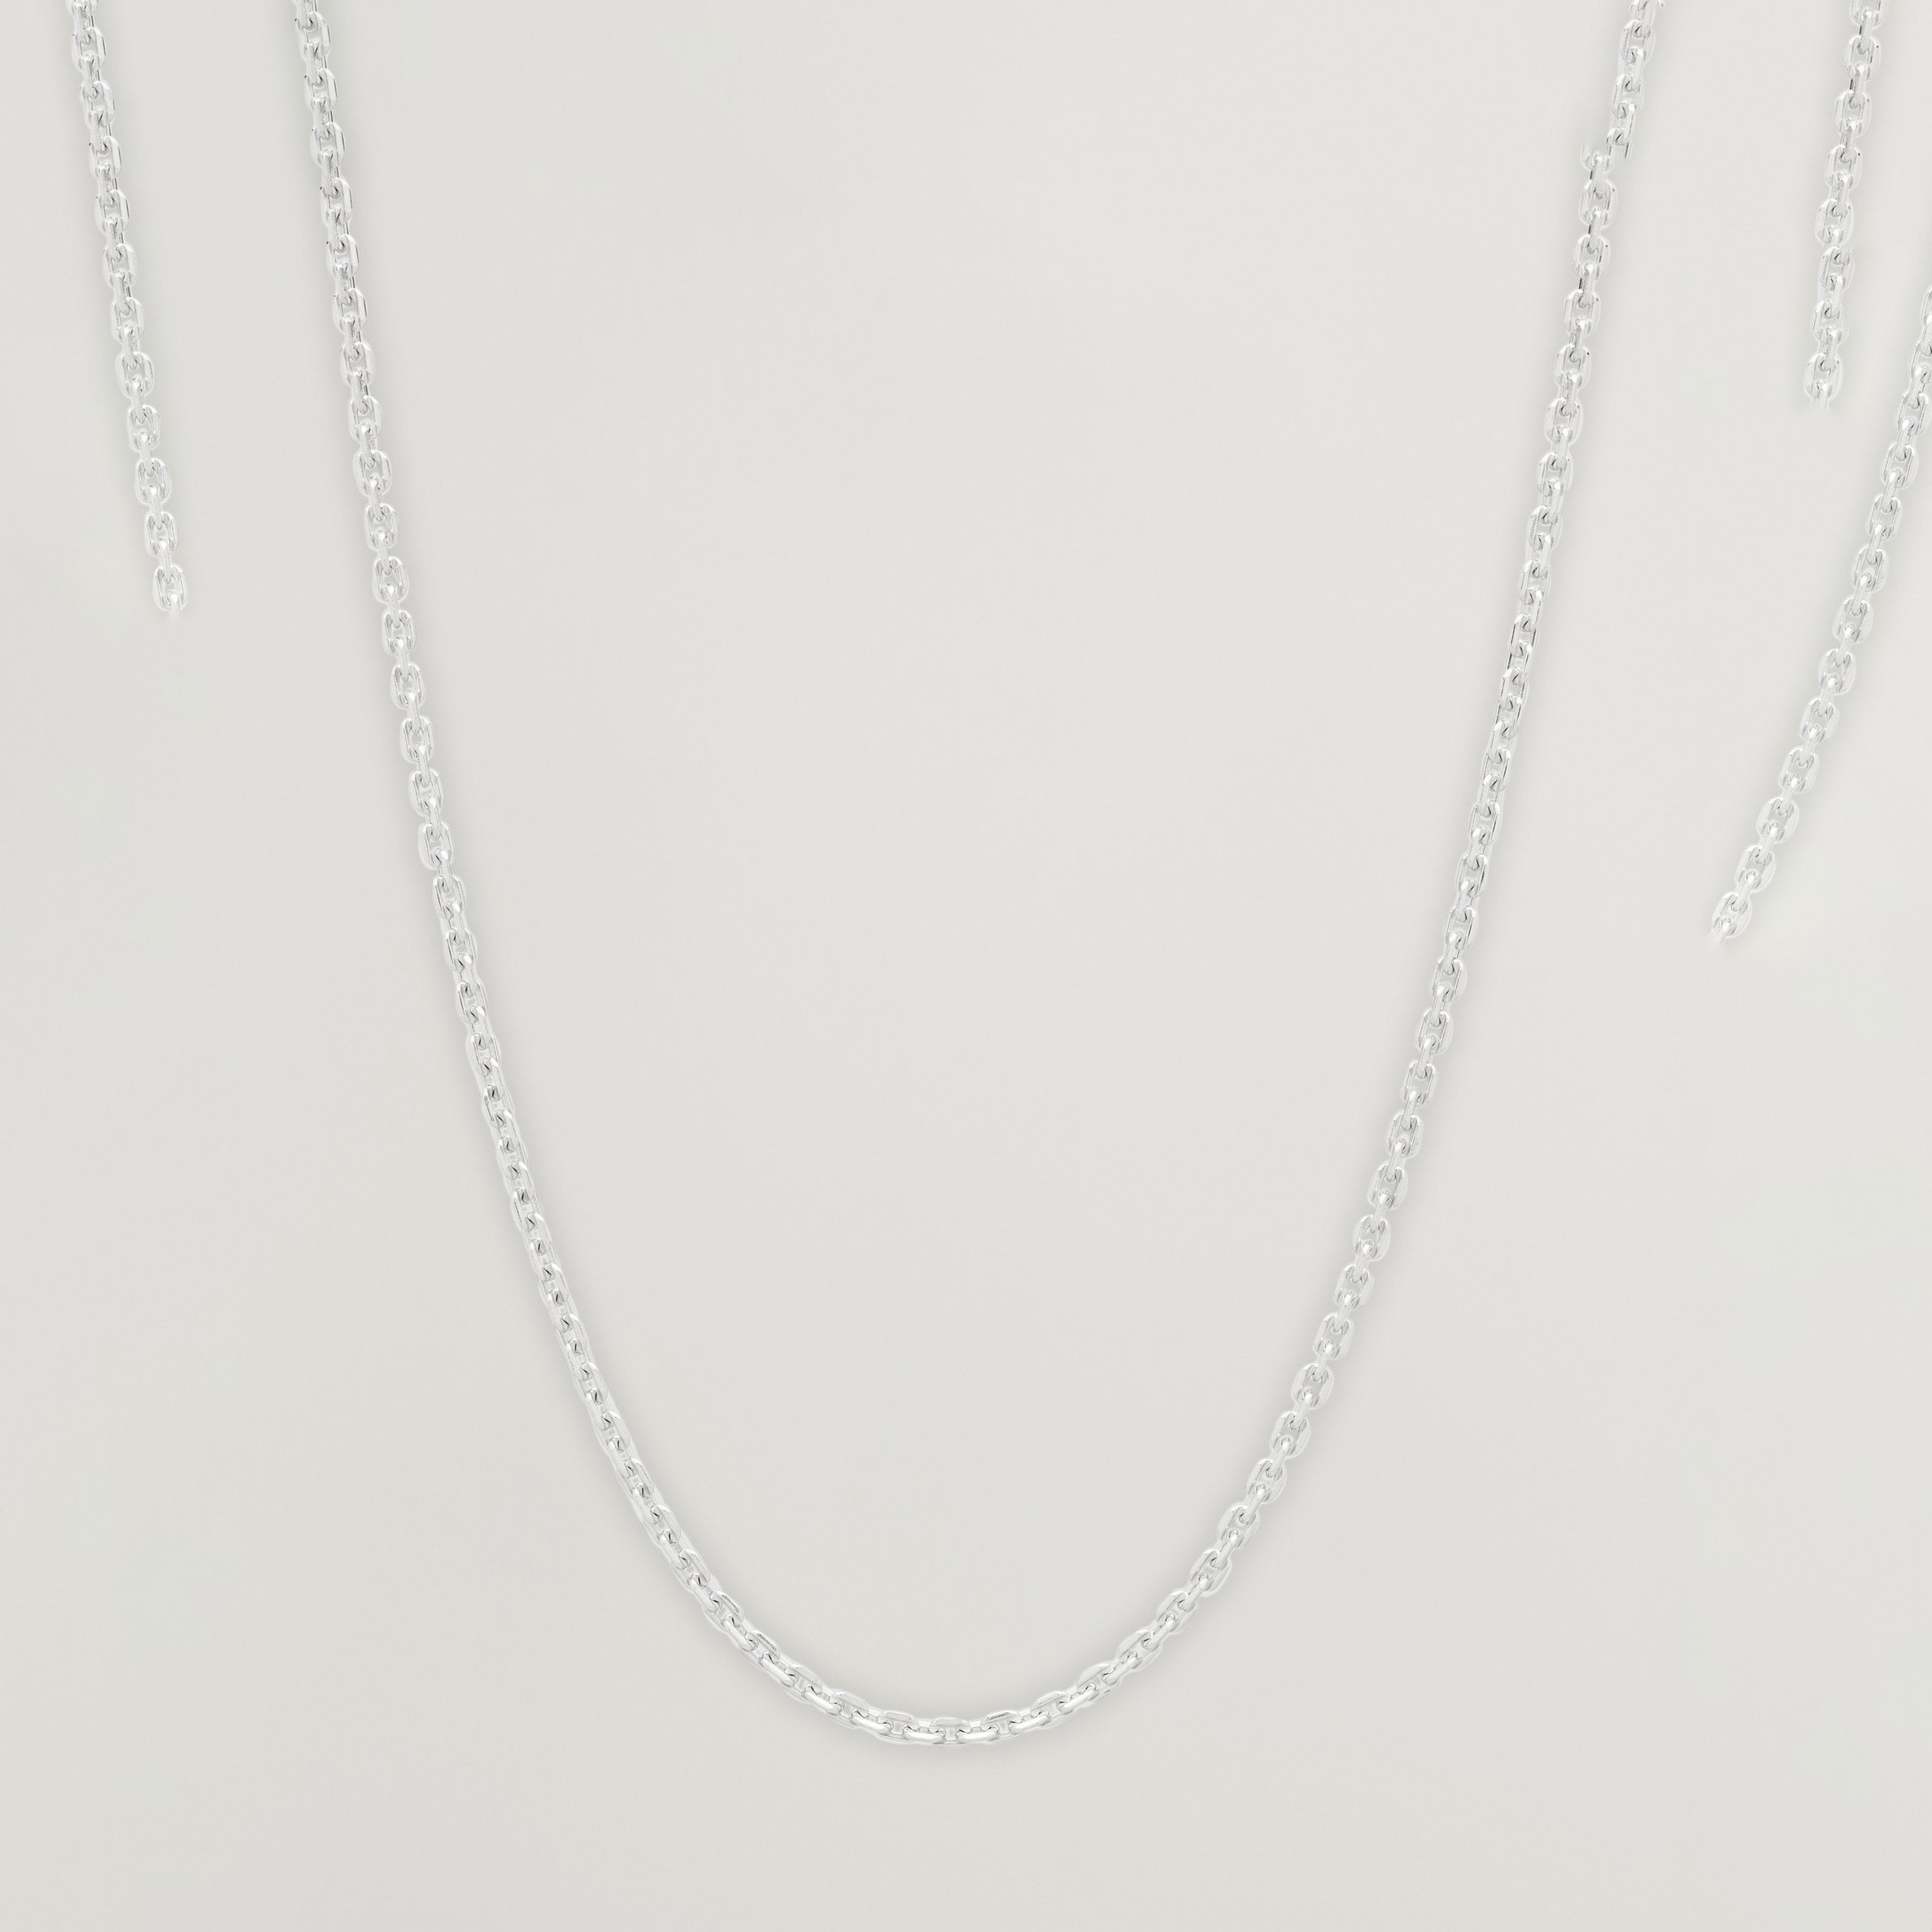 Tom Wood Anker Chain Necklace Silver at CareOfCarl.com